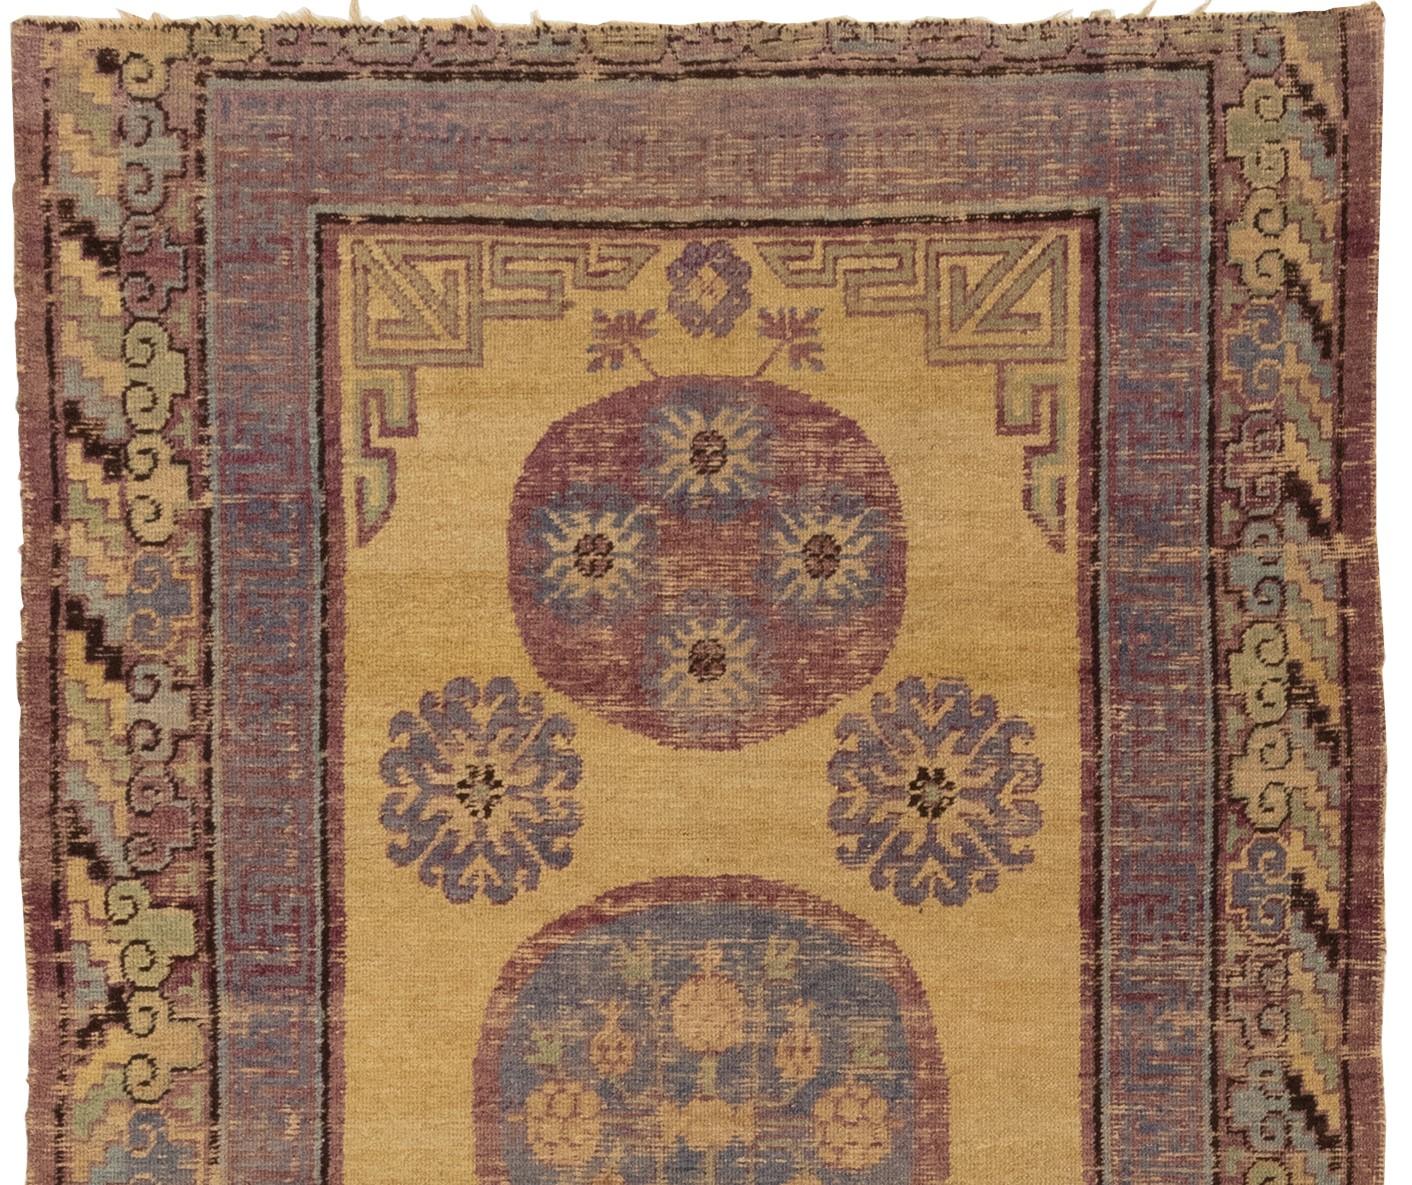 This antique Khotan rug from East Turkistan is truly stunning. It's clear that a lot of care and attention went into its creation around 1900, and the circular three medallions with more circular patterns inside and out are a real highlight. I love